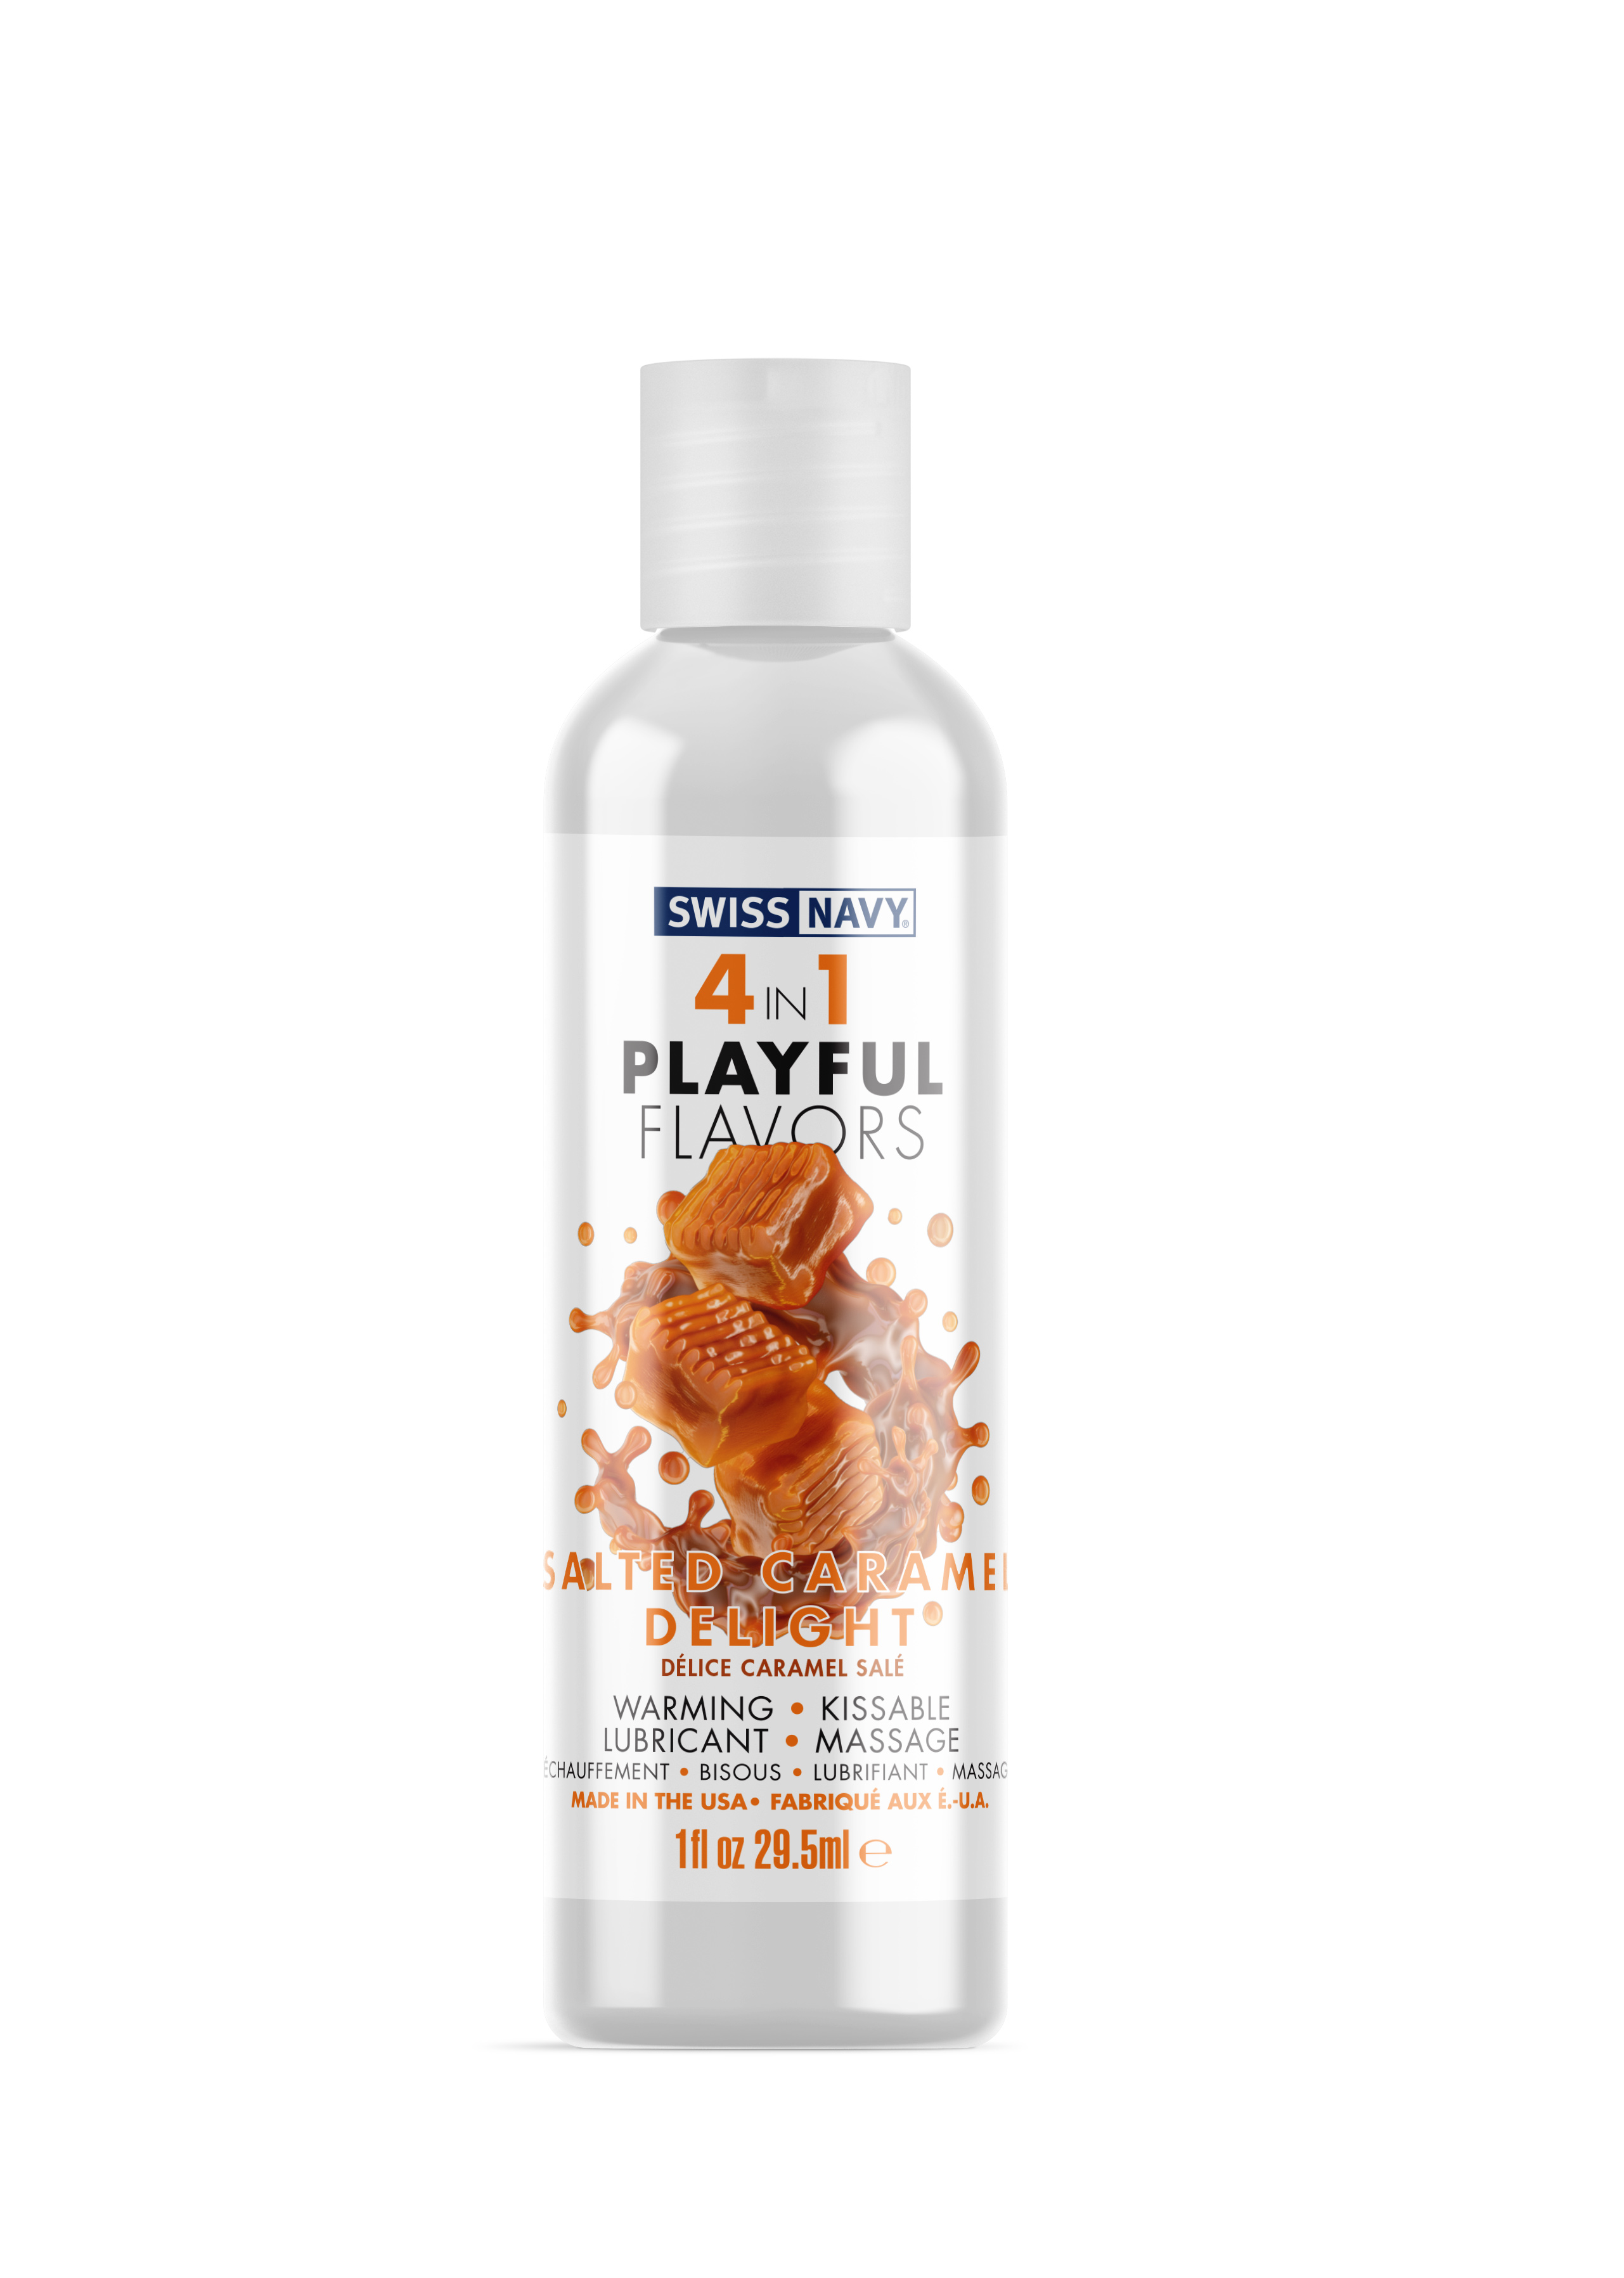 swiss navy  in  playful flavors salted caramel delight  fl. oz. 